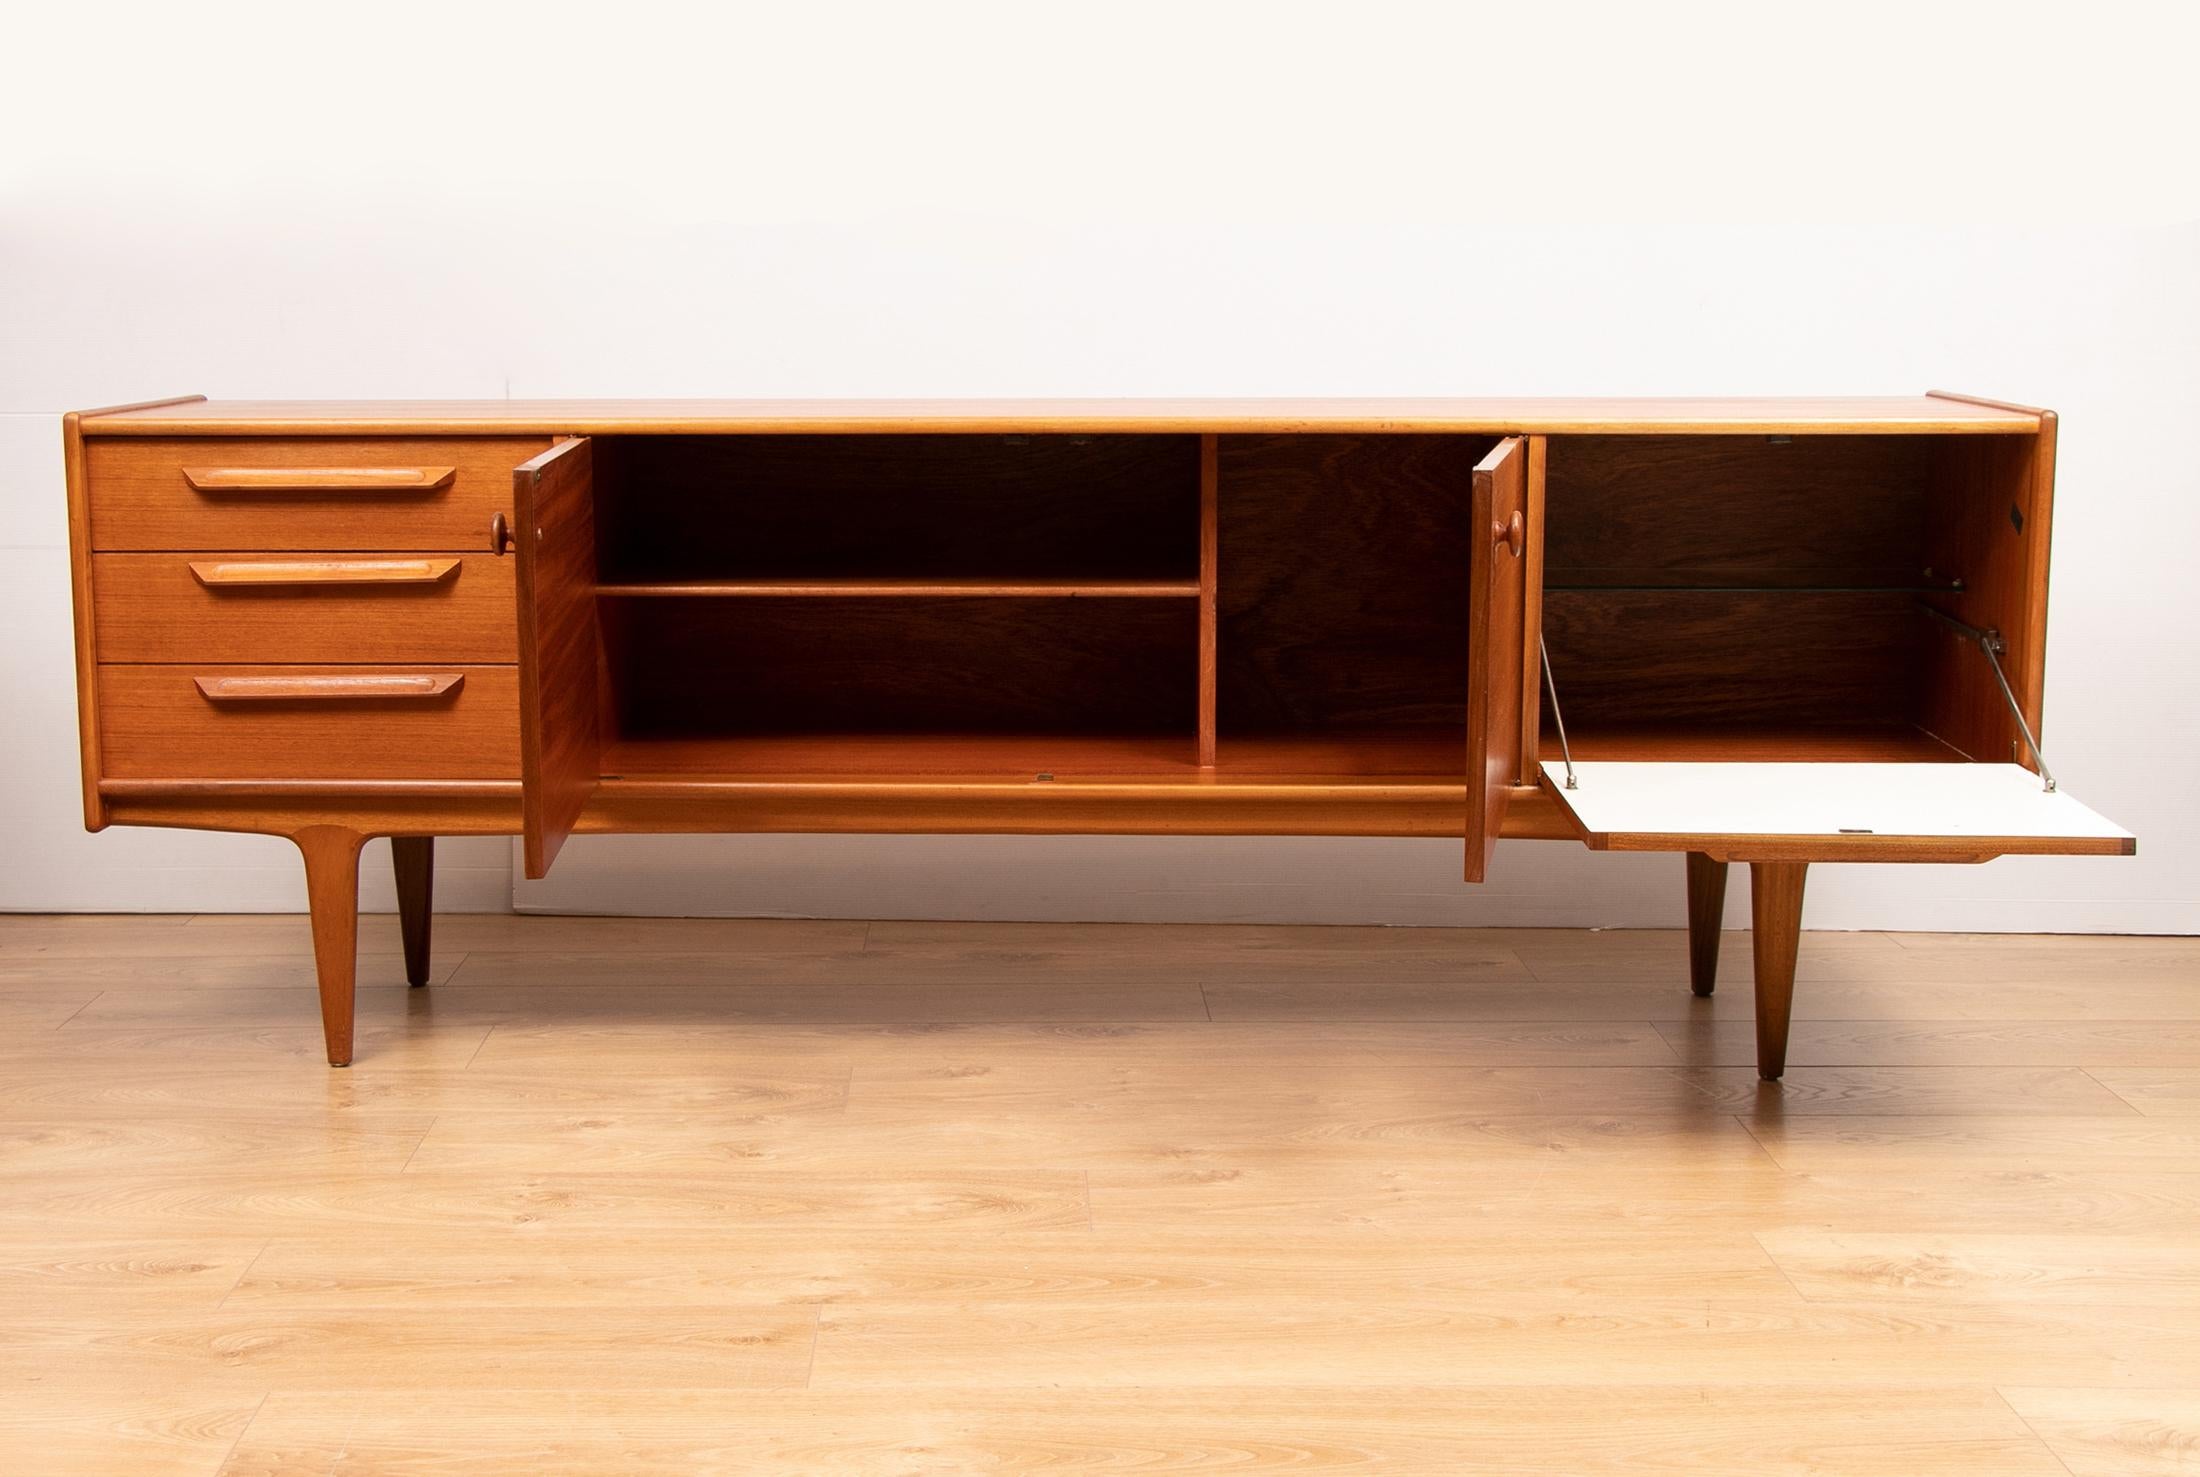 A midcentury teak sideboard designed by A. Younger Ltd, Scotland, circa 1960. The sideboard contains three drawers and three storage compartments. Very good condition with minor signs of use.